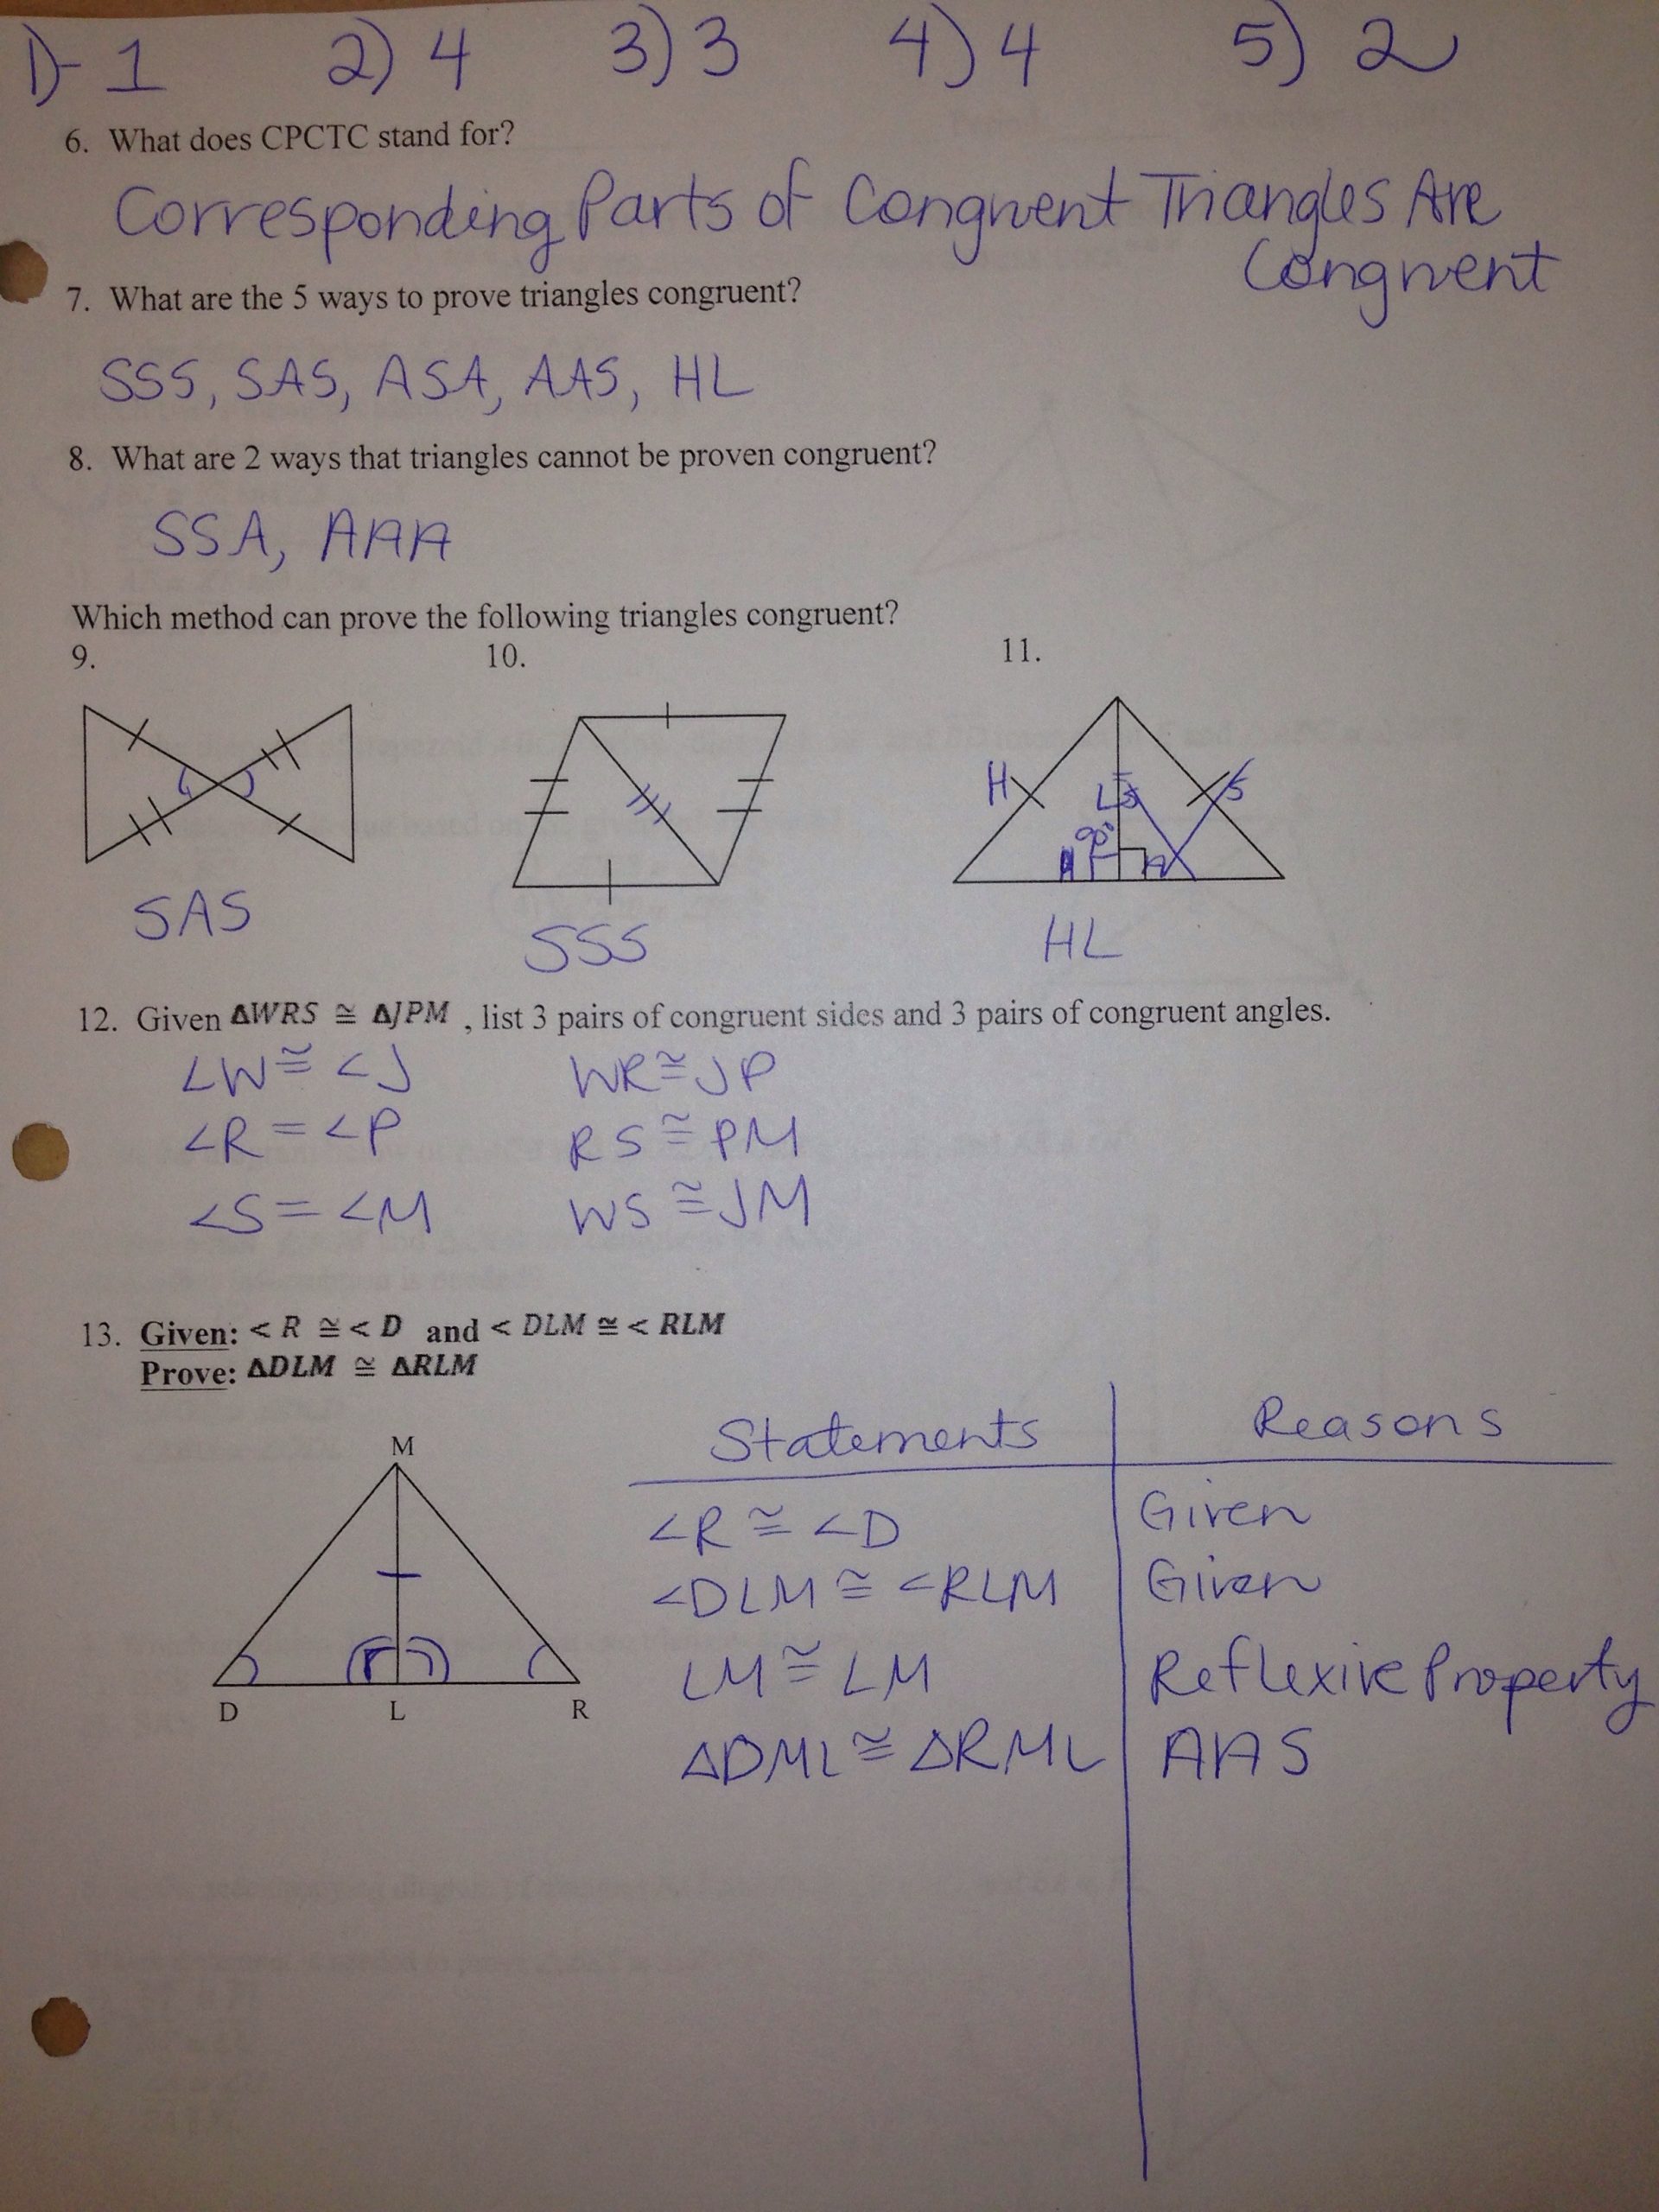 Congruent Triangles Worksheet Answer Key Triangle Congruence Test Review Key